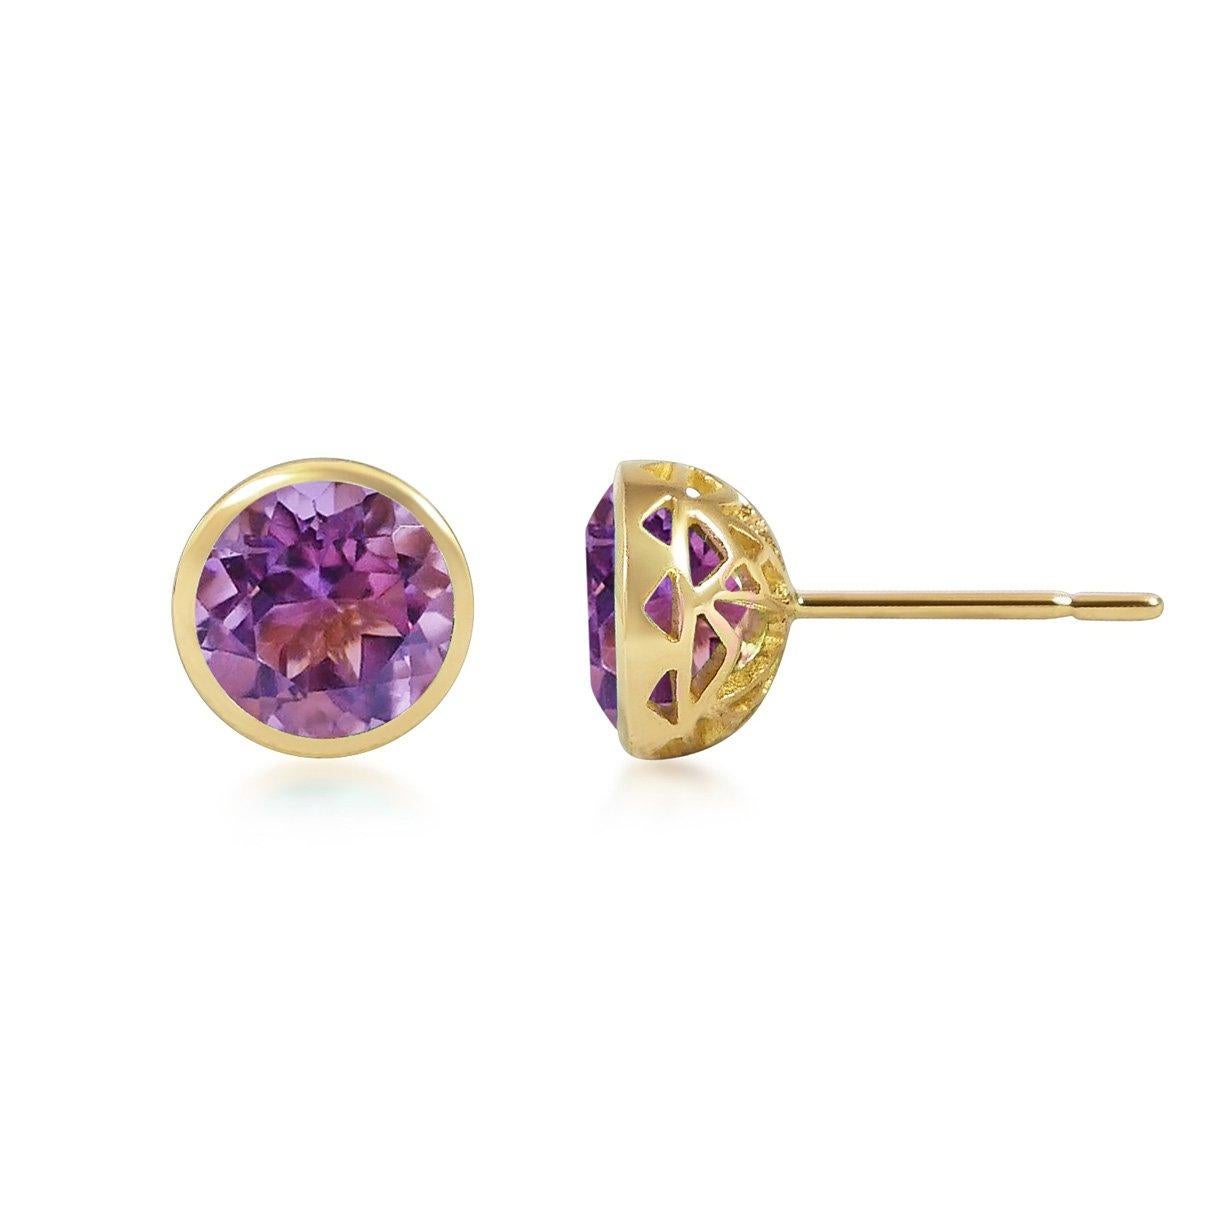 Round Cut Handcrafted 2.40 Carats Amethyst 18 Karat Yellow Gold Stud Earrings For Sale